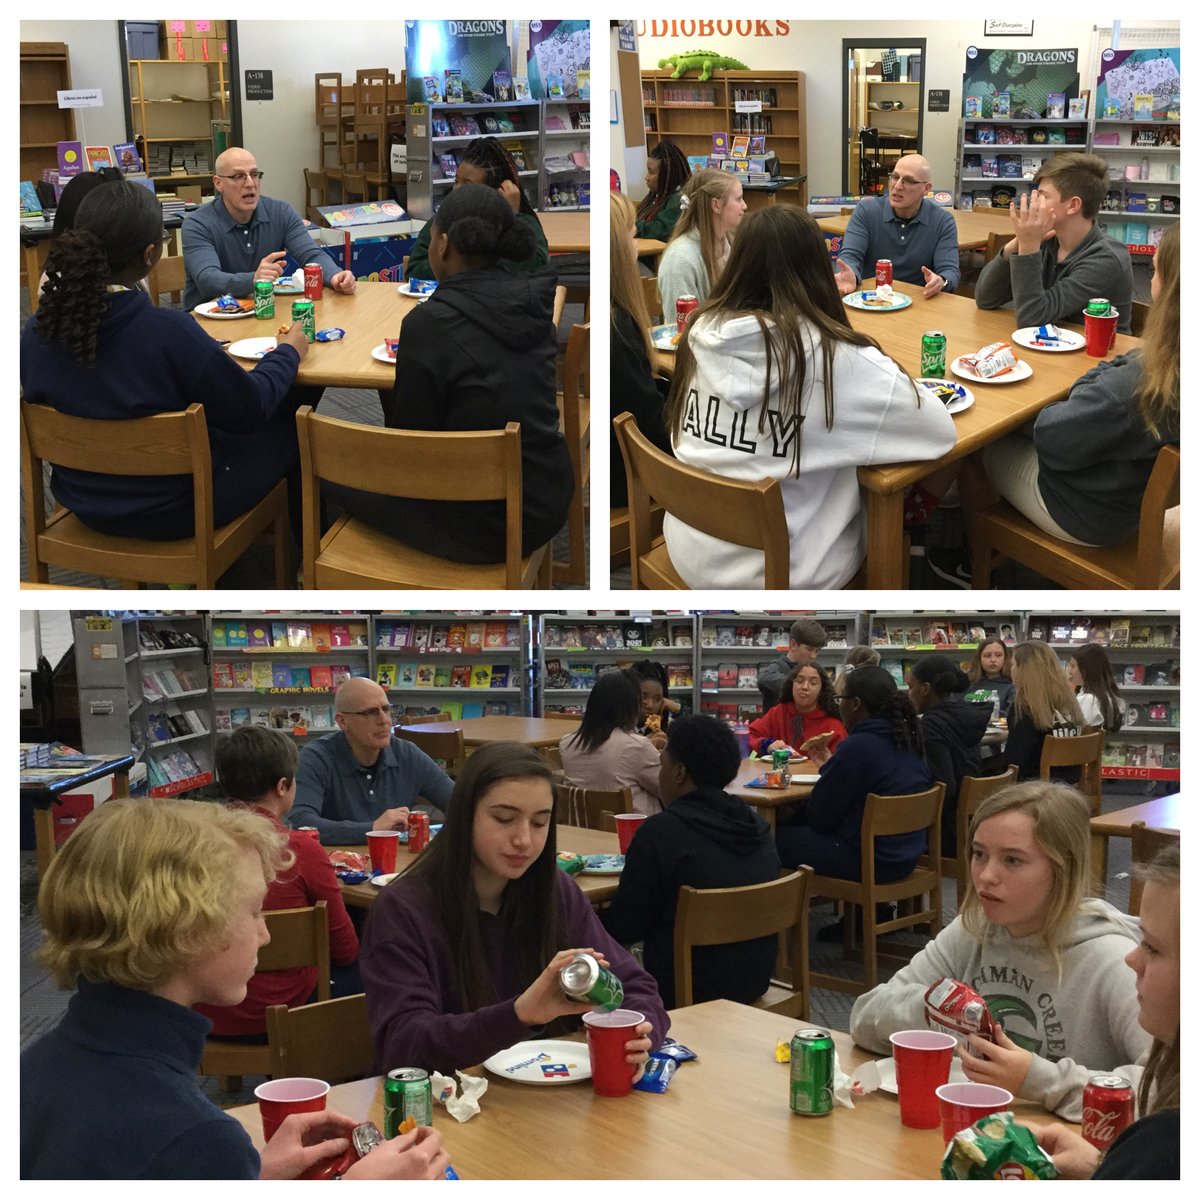 Gordon Korman worked the room during an 8th grade pizza party so he could speak directly with students. Hopefully these avid readers & aspiring writers found some inspiration from the experience! @DutchmanCreekMS @RHSD_LMS @gordonkorman #IGotSchooledAtTheCreek #CanYouSeeIt